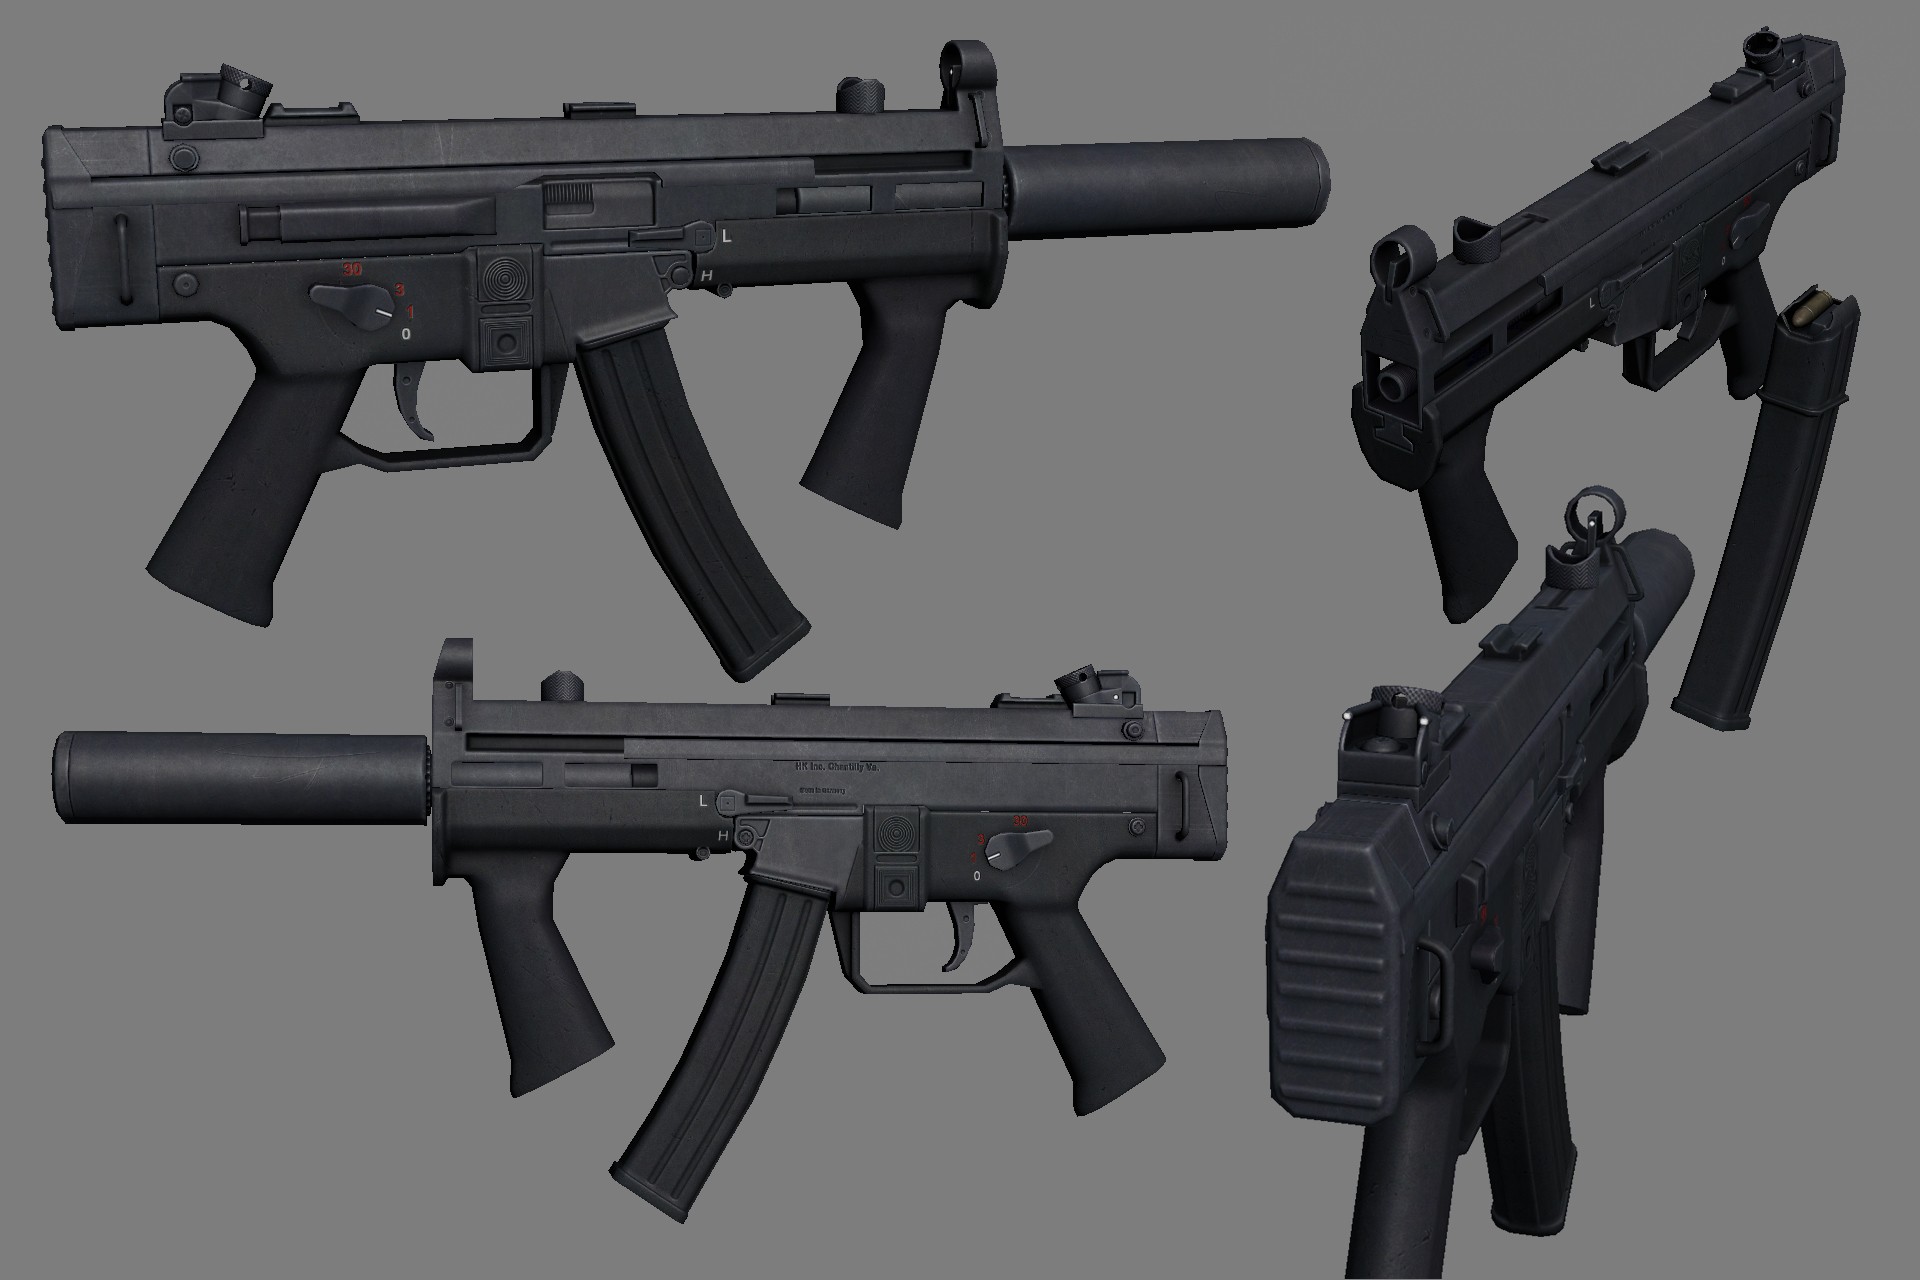 Hk Smg 2 Related Keywords & Suggestions - Hk Smg 2 Long Tail